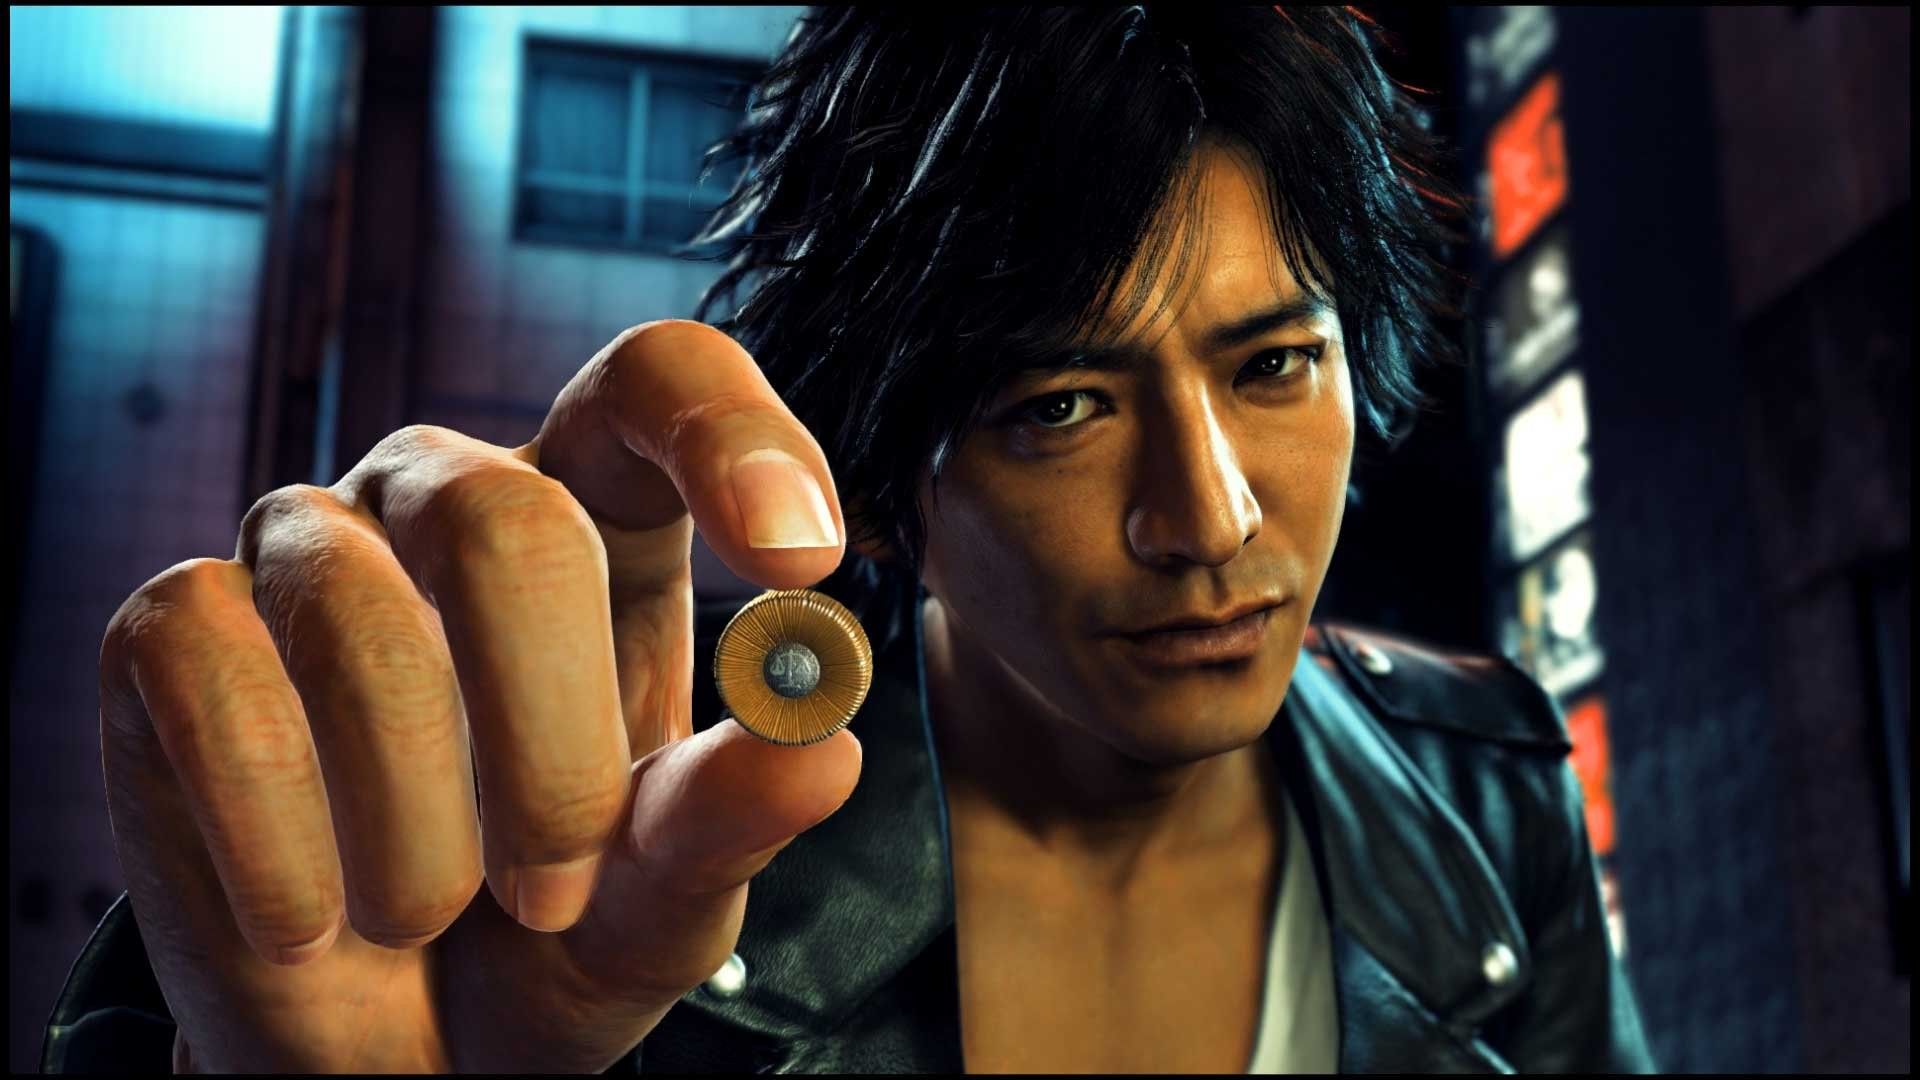 Judgment DualShockers Game of the Year 2019 PS4 Exclusive